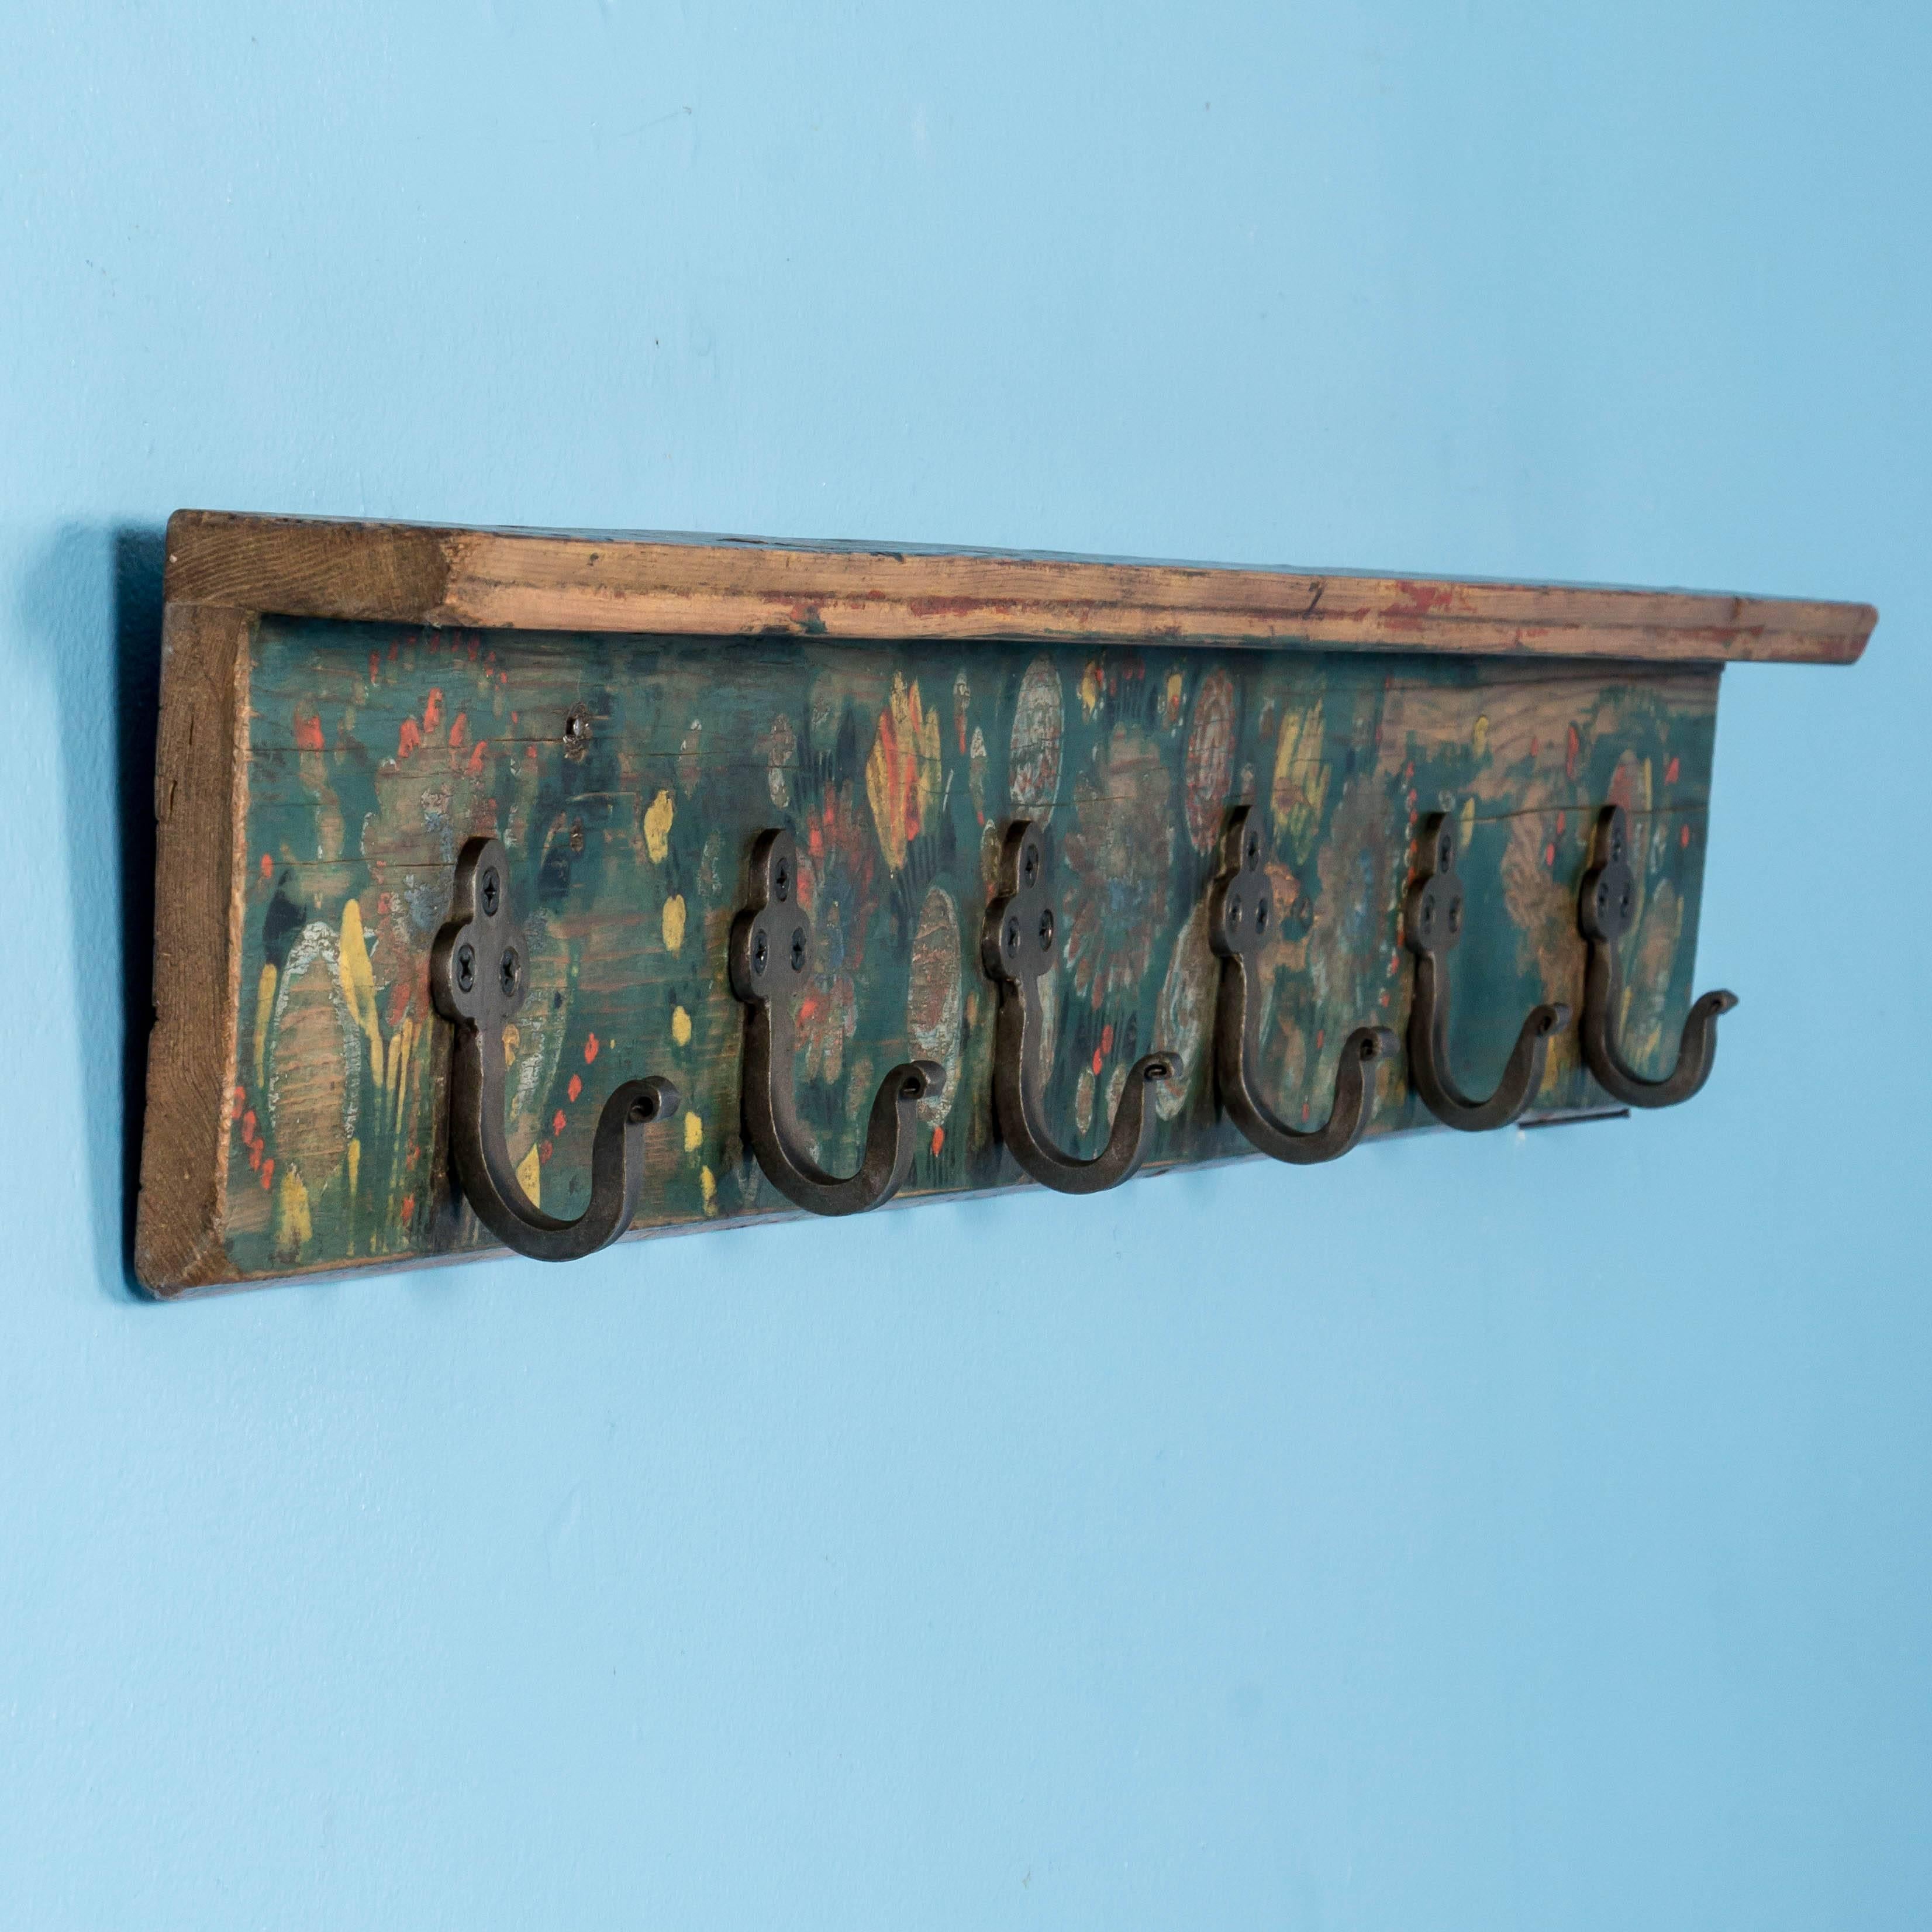 This short hanging wall rack still maintains its vibrant green, yellow and red paint, with Folk Art flowers strewn along the length. While the painted floral design is original, the grey metal hooks are replacements. The painted pine panel has been